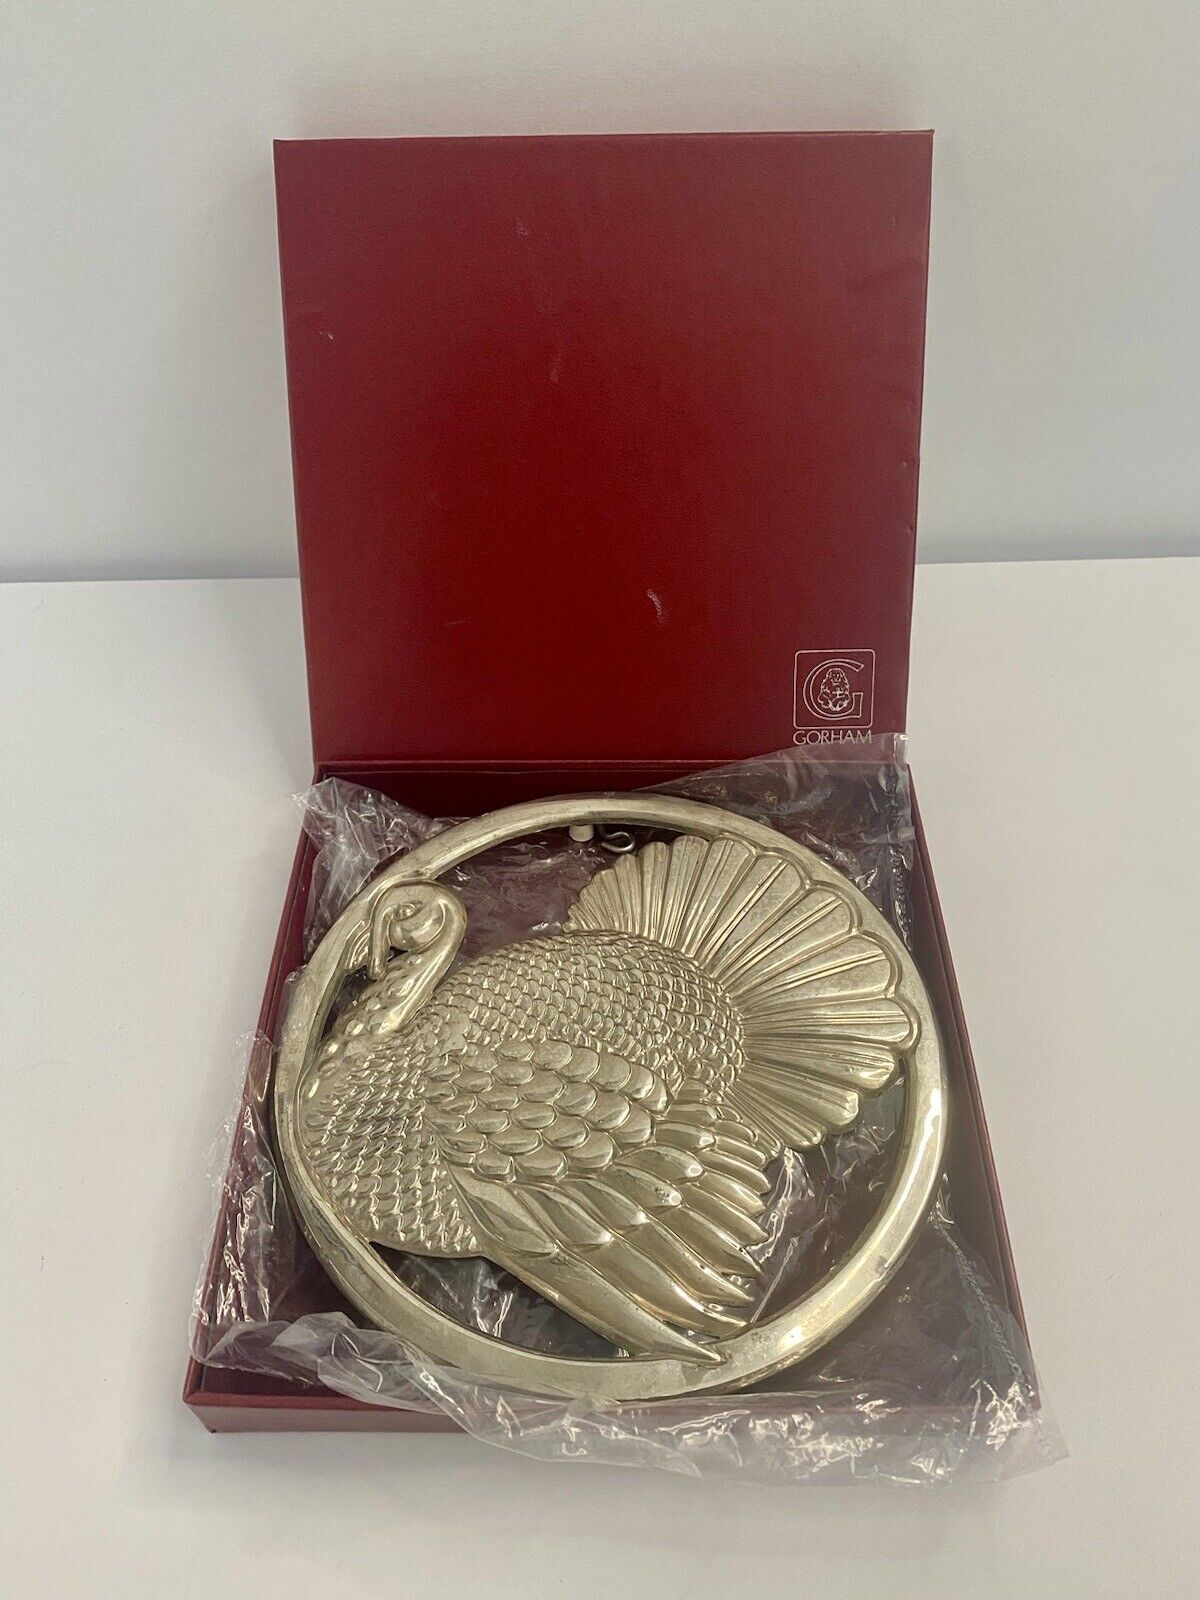 1982 Gorham Silver Plated Turkey Trivet Italy Wall Hanging Vintage Thanksgiving